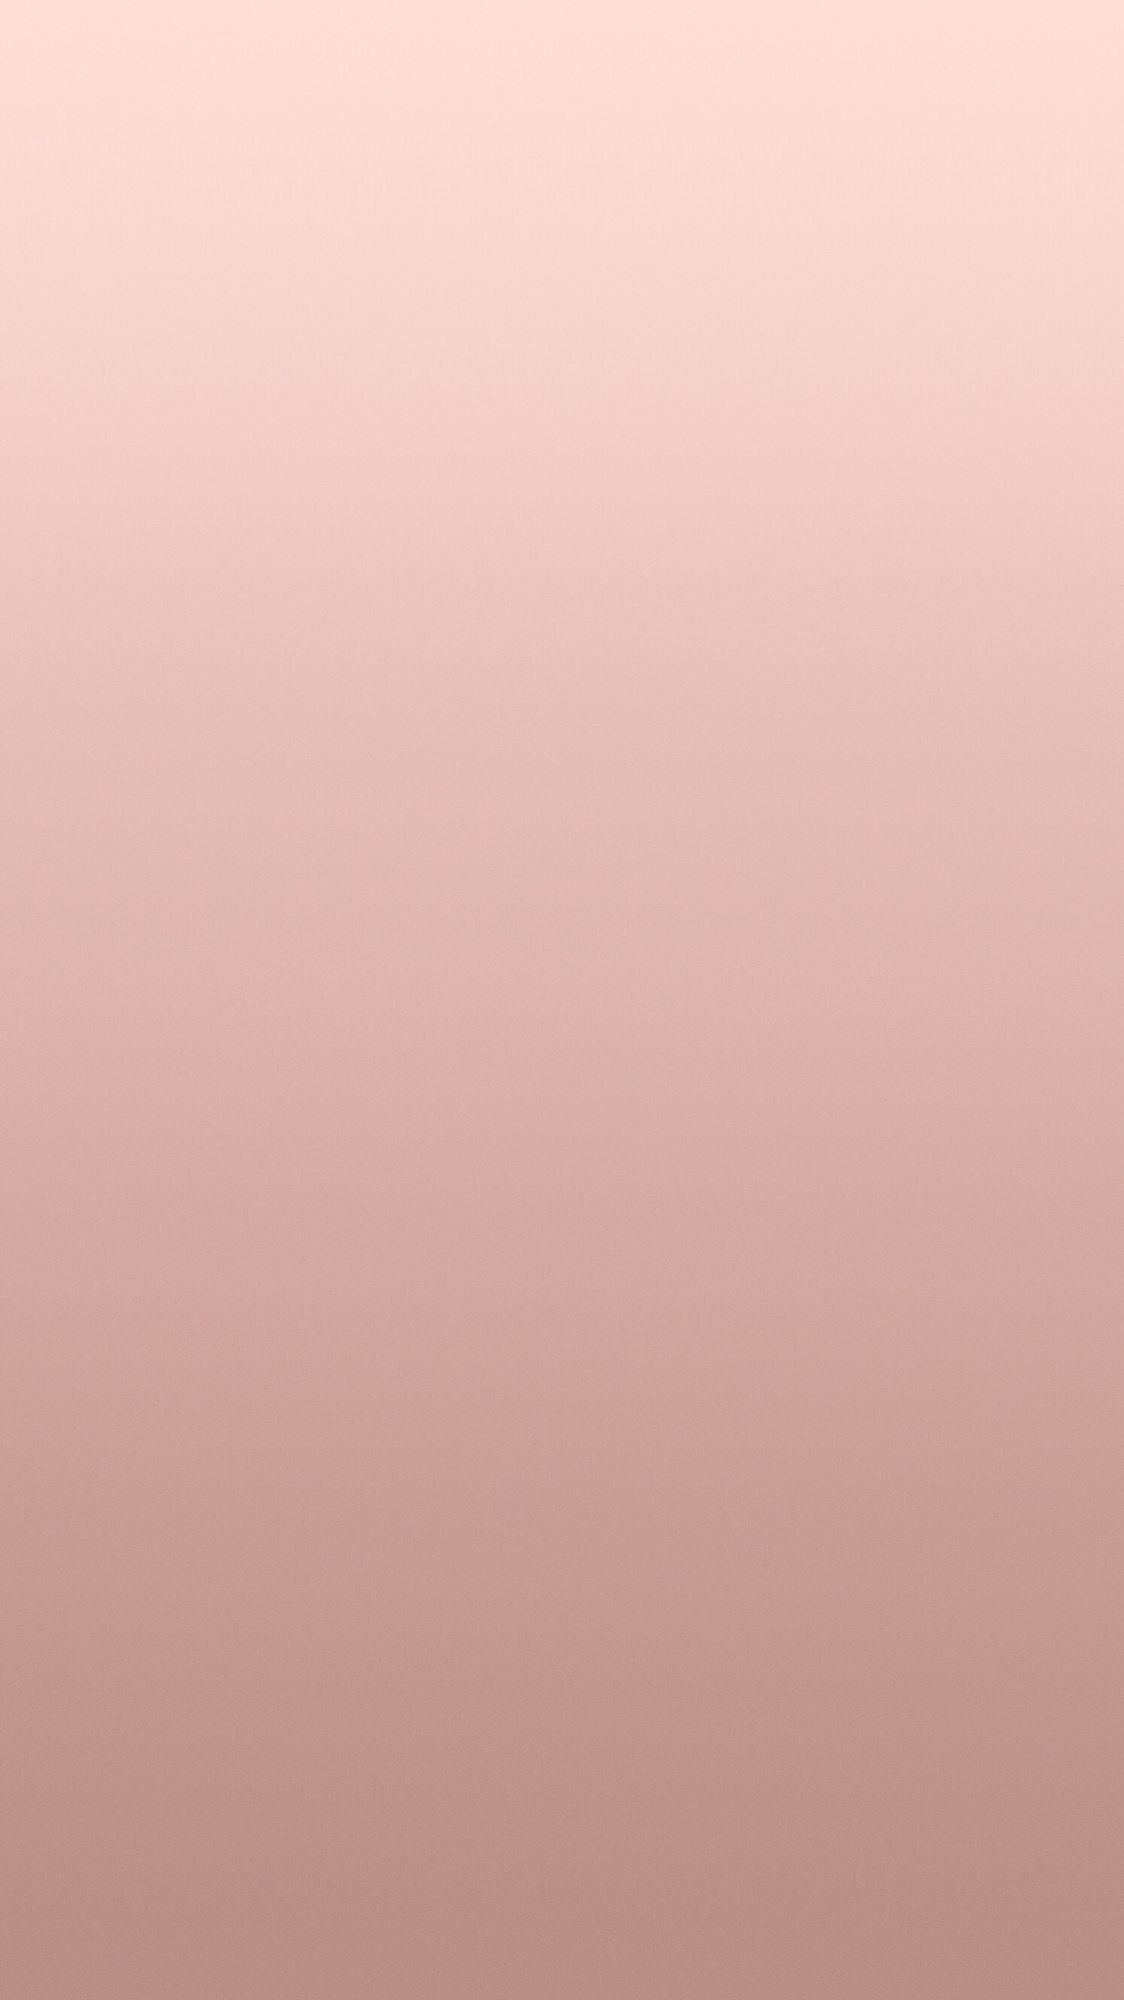 iPhone 6s Plus Rose Gold Wallpaper. Ombre wallpaper, Ombre background, iPhone wallpaper